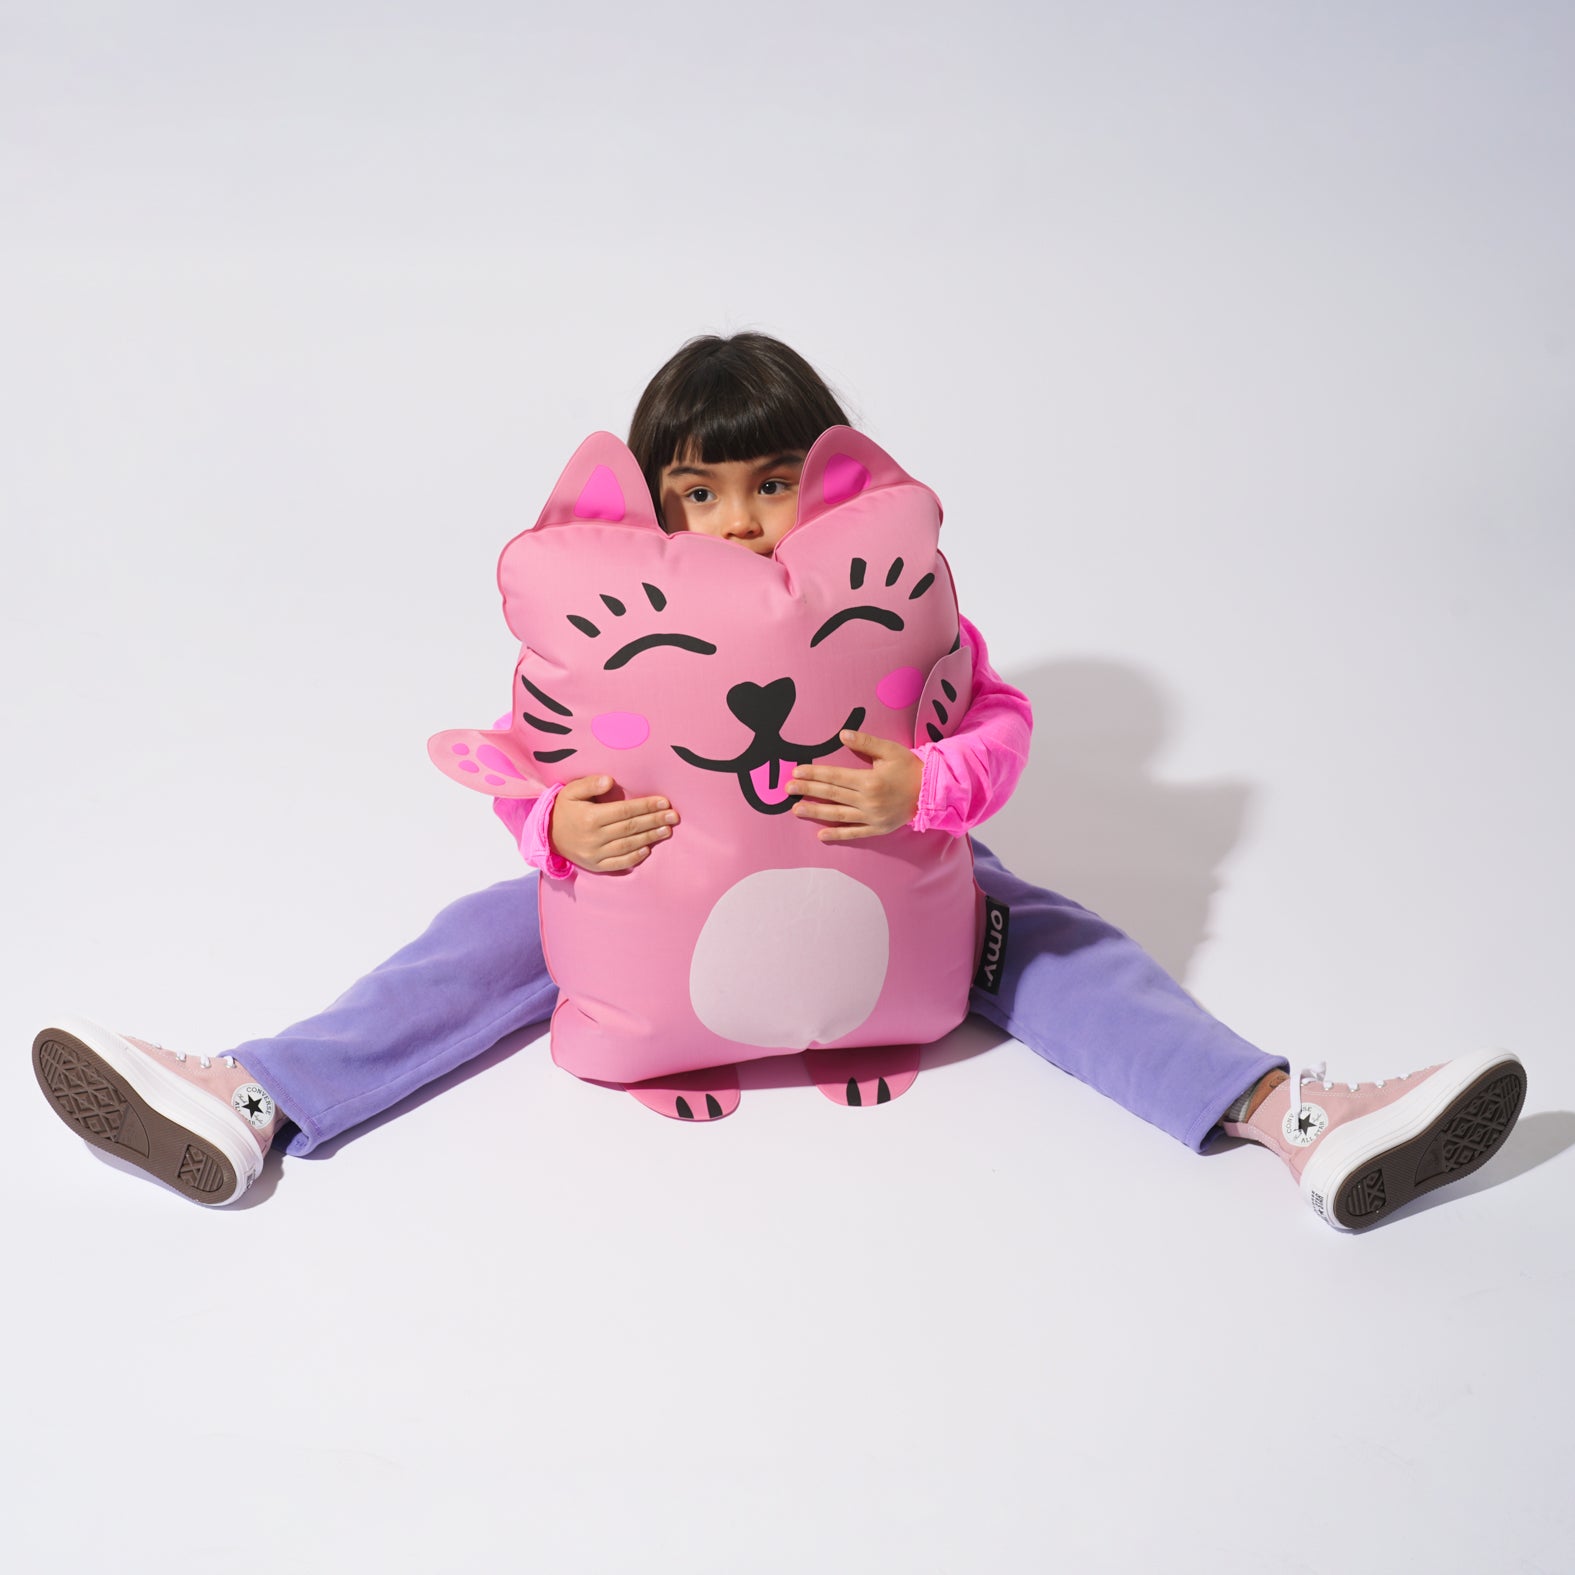 Kitty  - Super inflatable pillow